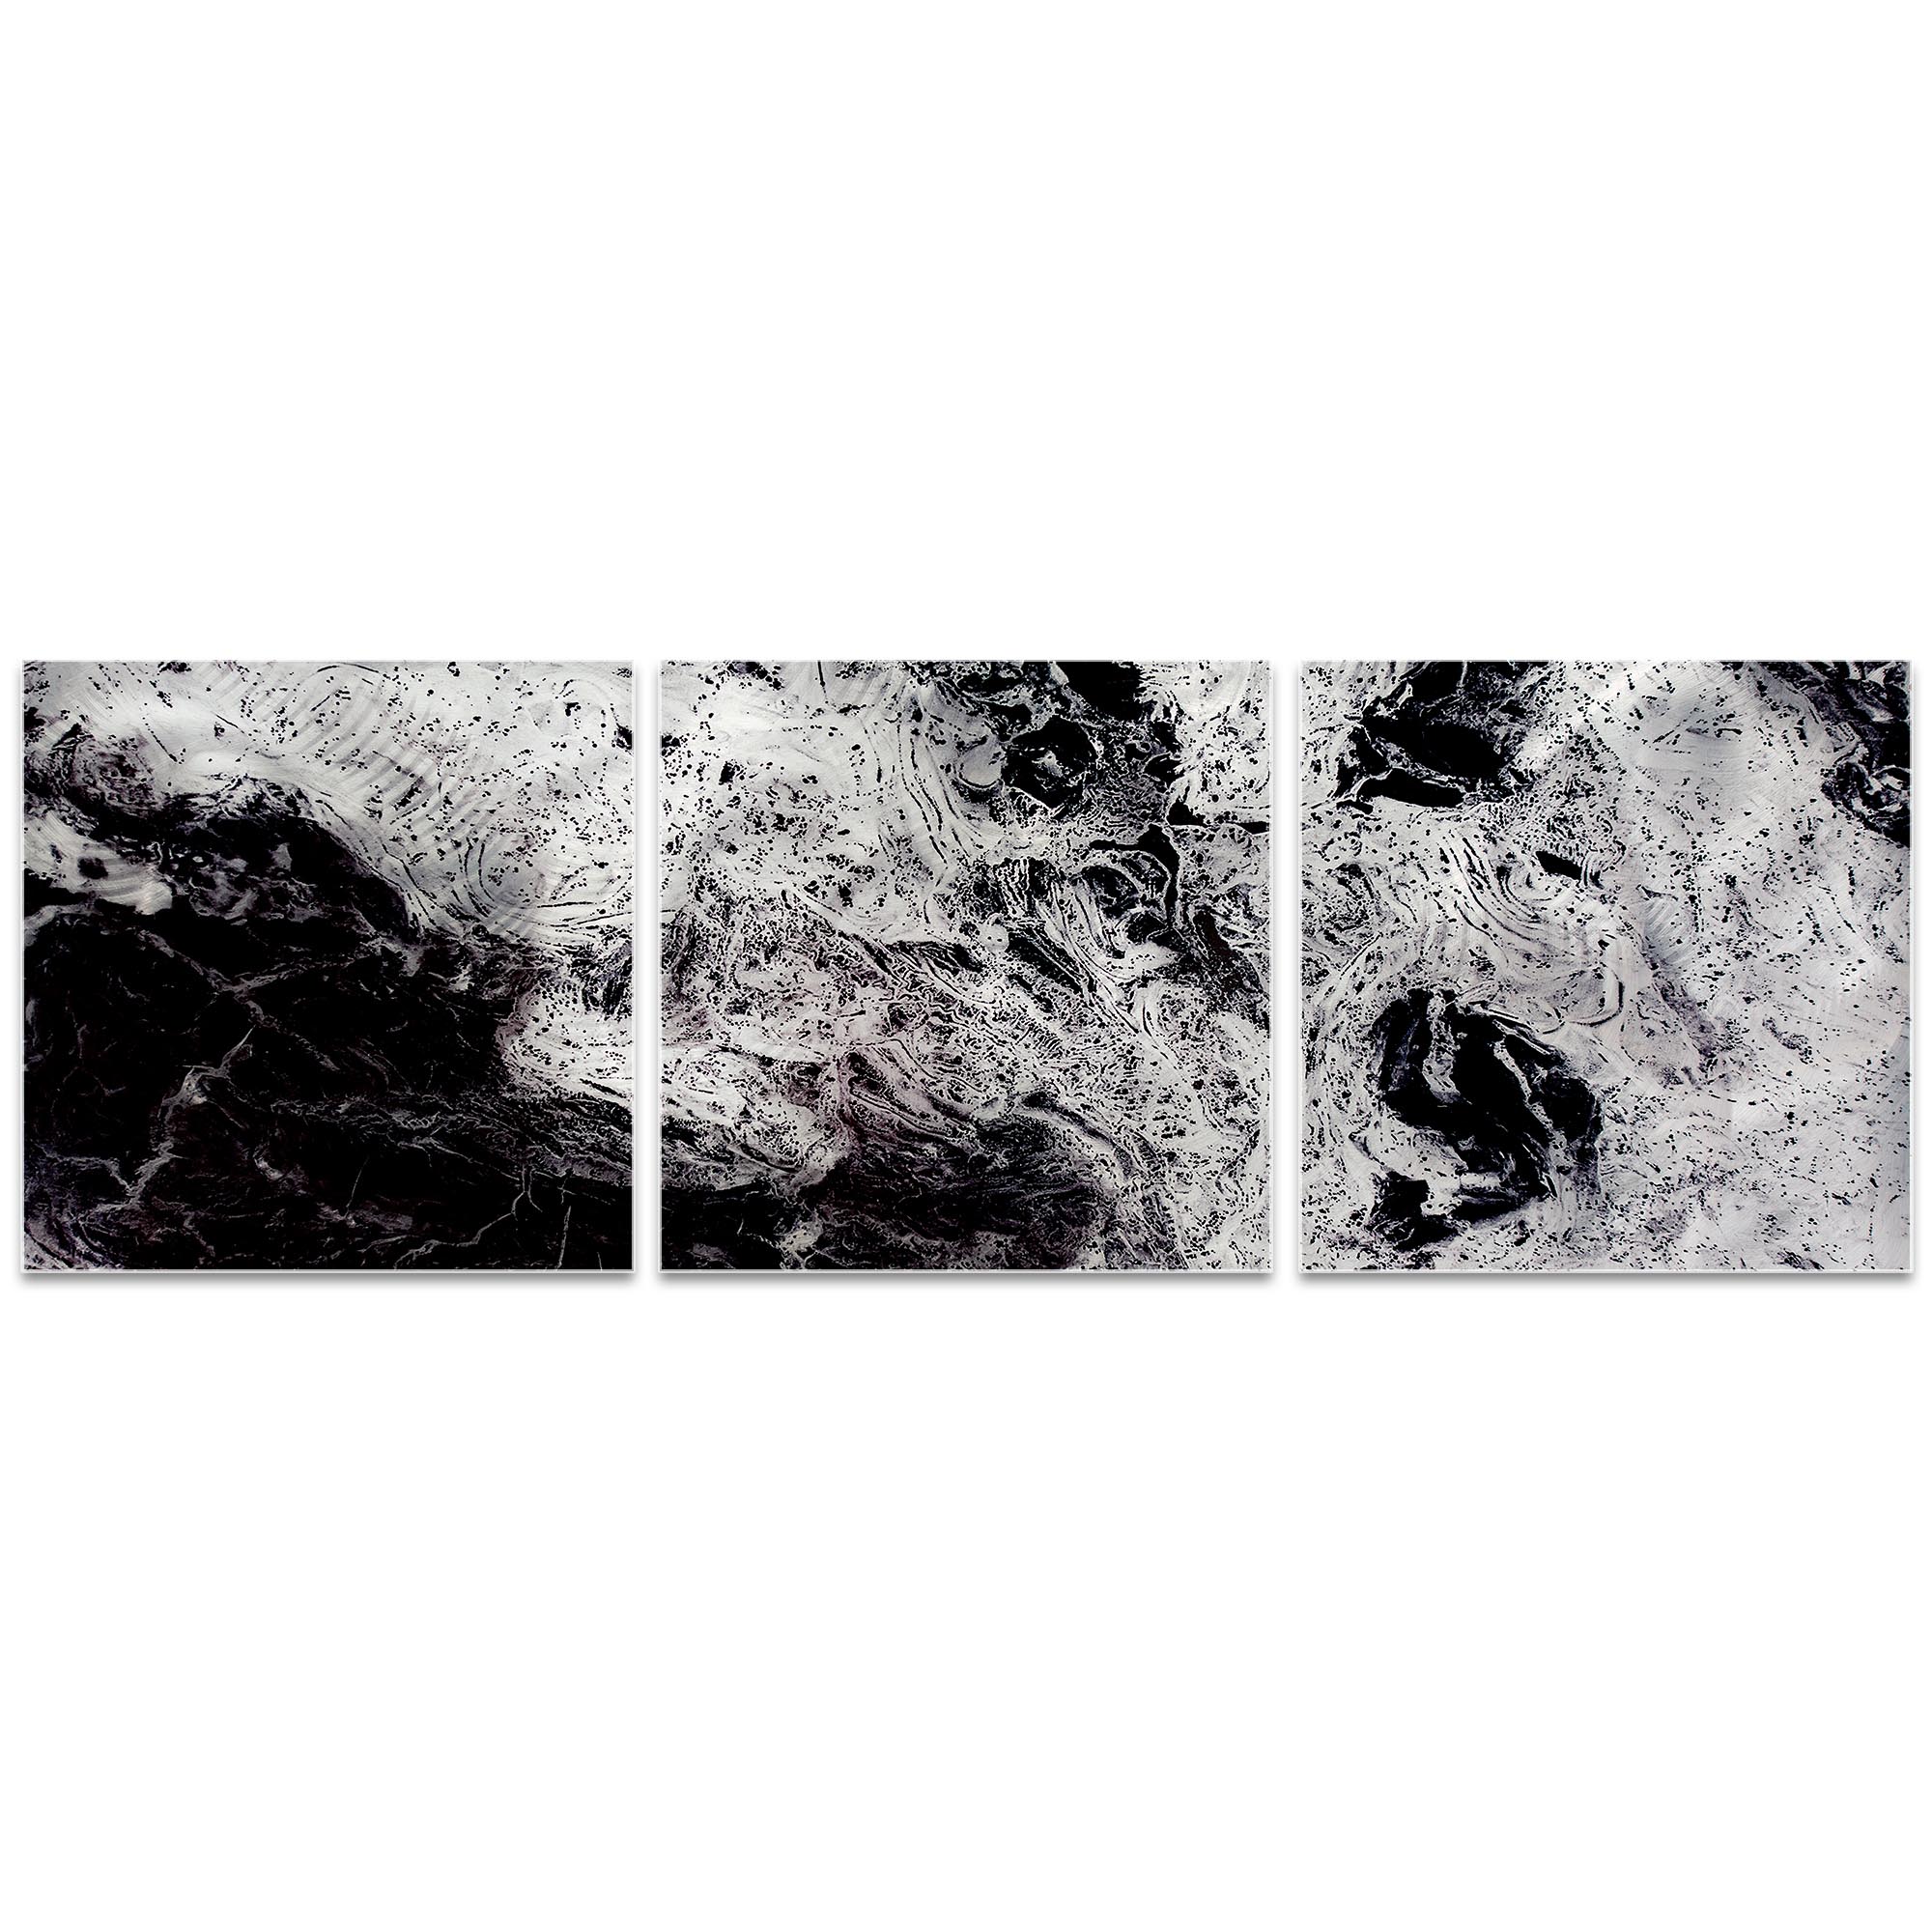 Storm Black Triptych 38x12in. Metal or Acrylic Abstract Decor - Image 2